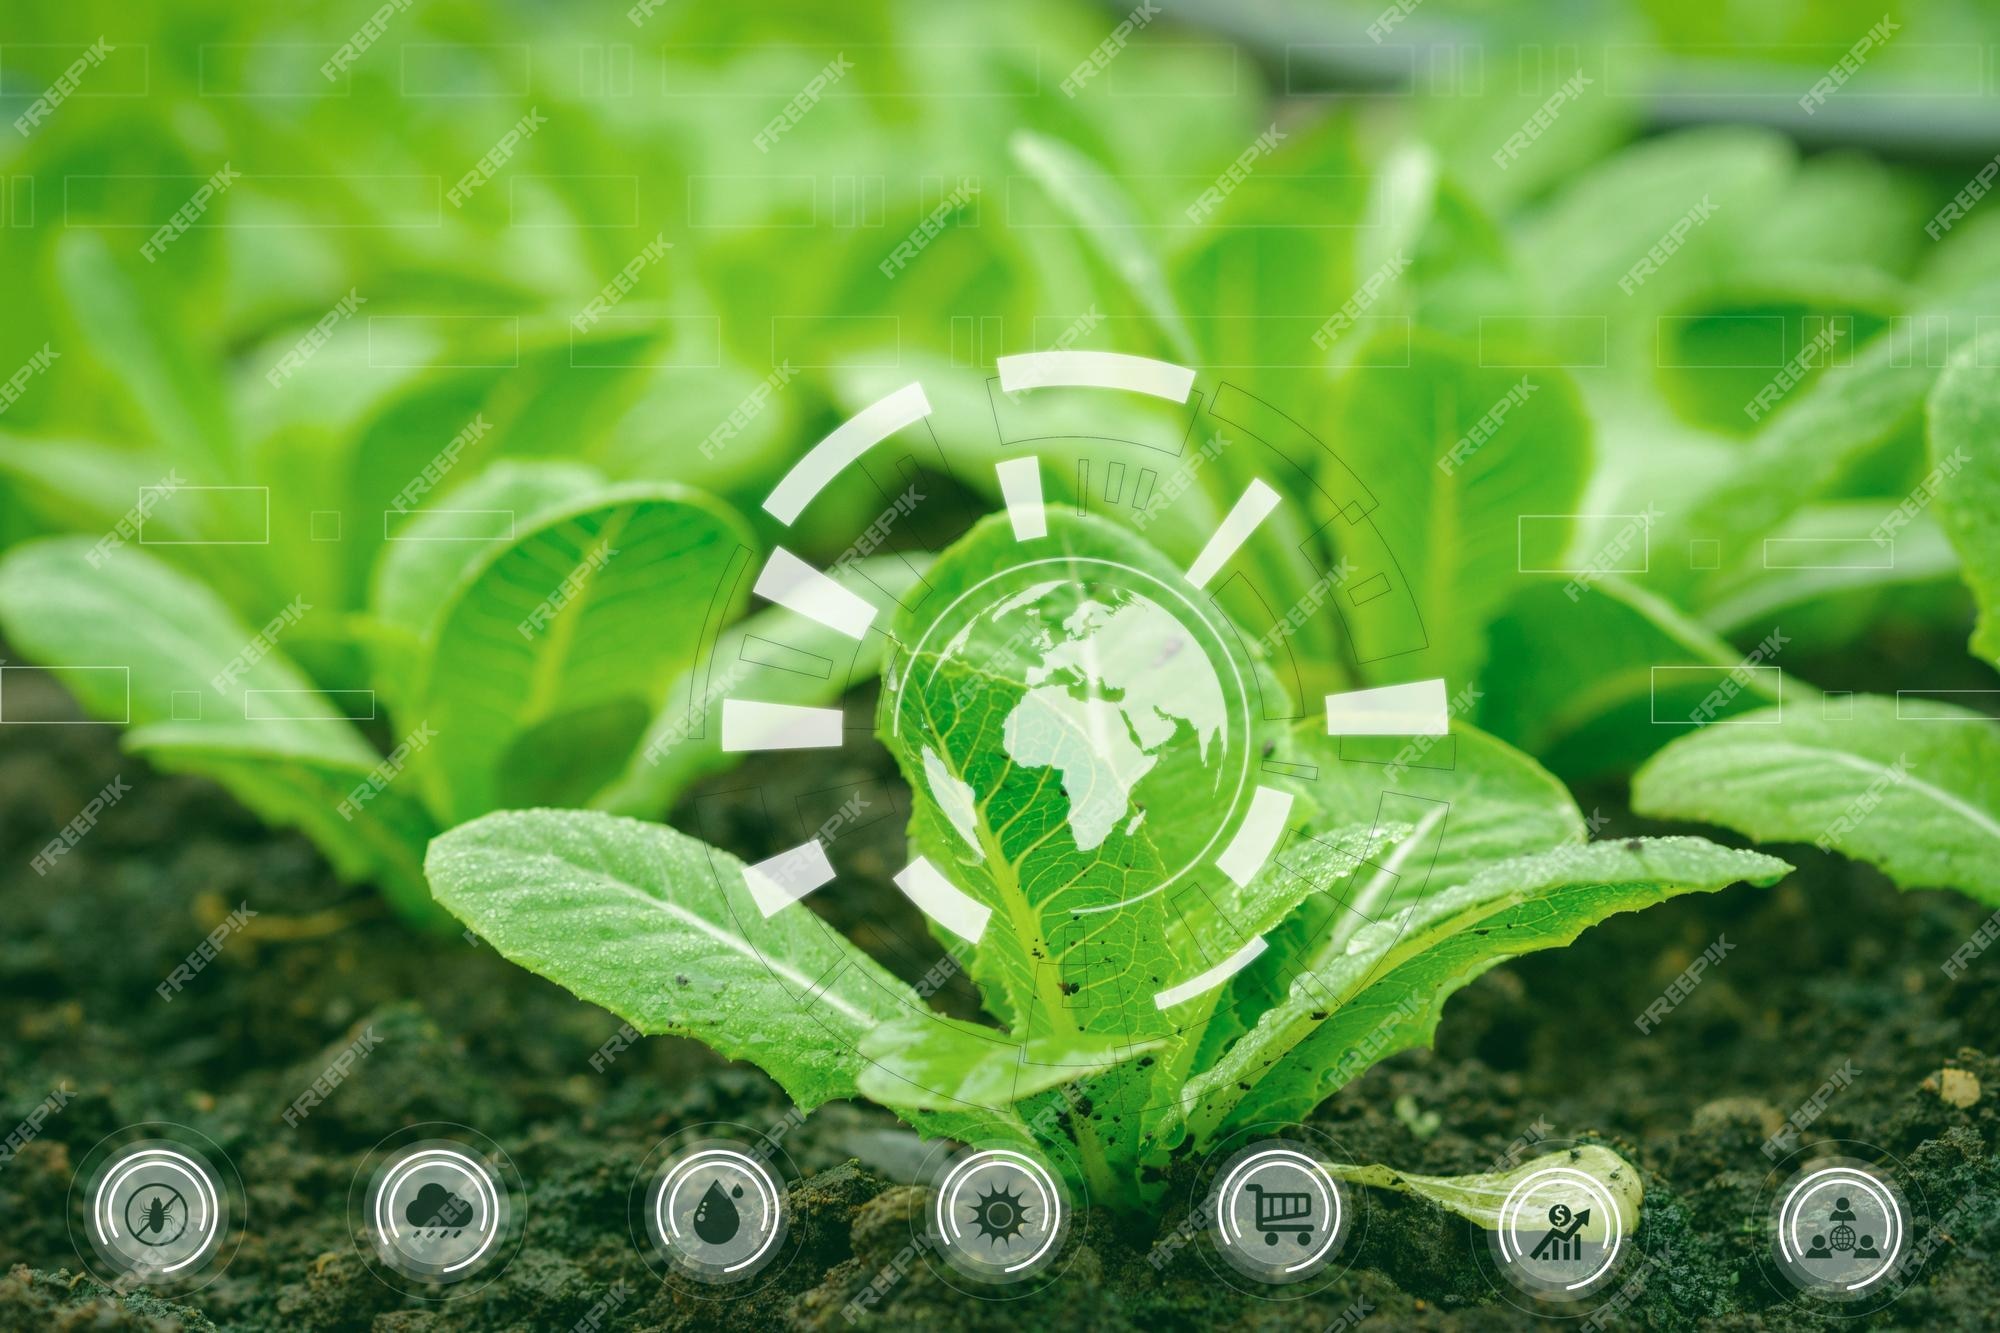 Premium Photo | Lettuce background with intelligent technology and natural  concepts the internet of things and agriculture of the future analysis  report of light water and products